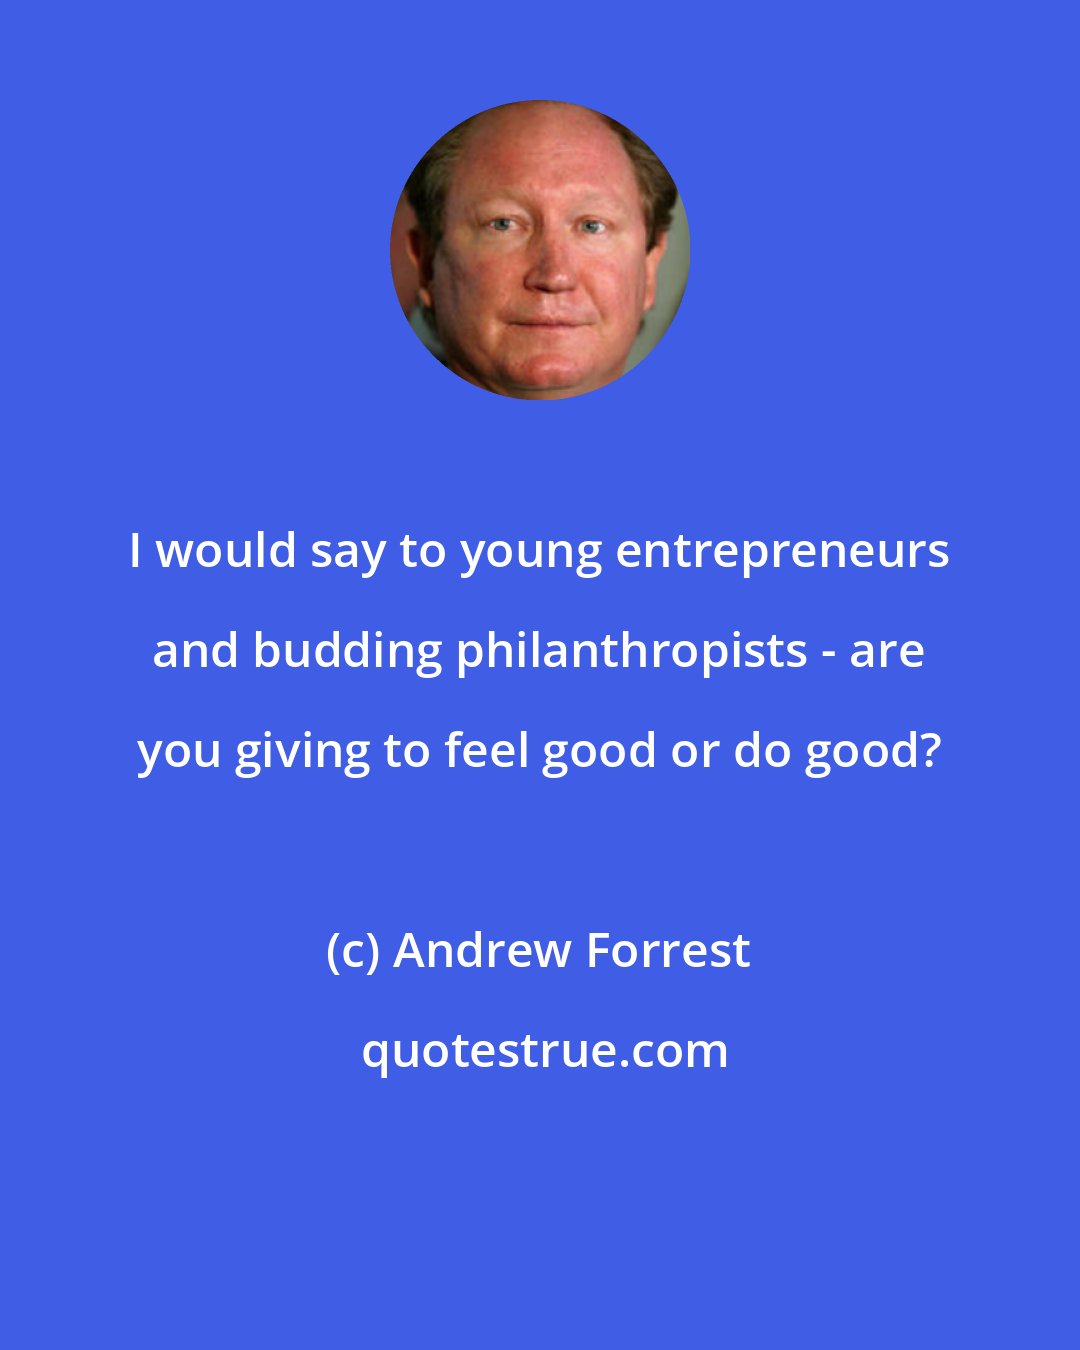 Andrew Forrest: I would say to young entrepreneurs and budding philanthropists - are you giving to feel good or do good?